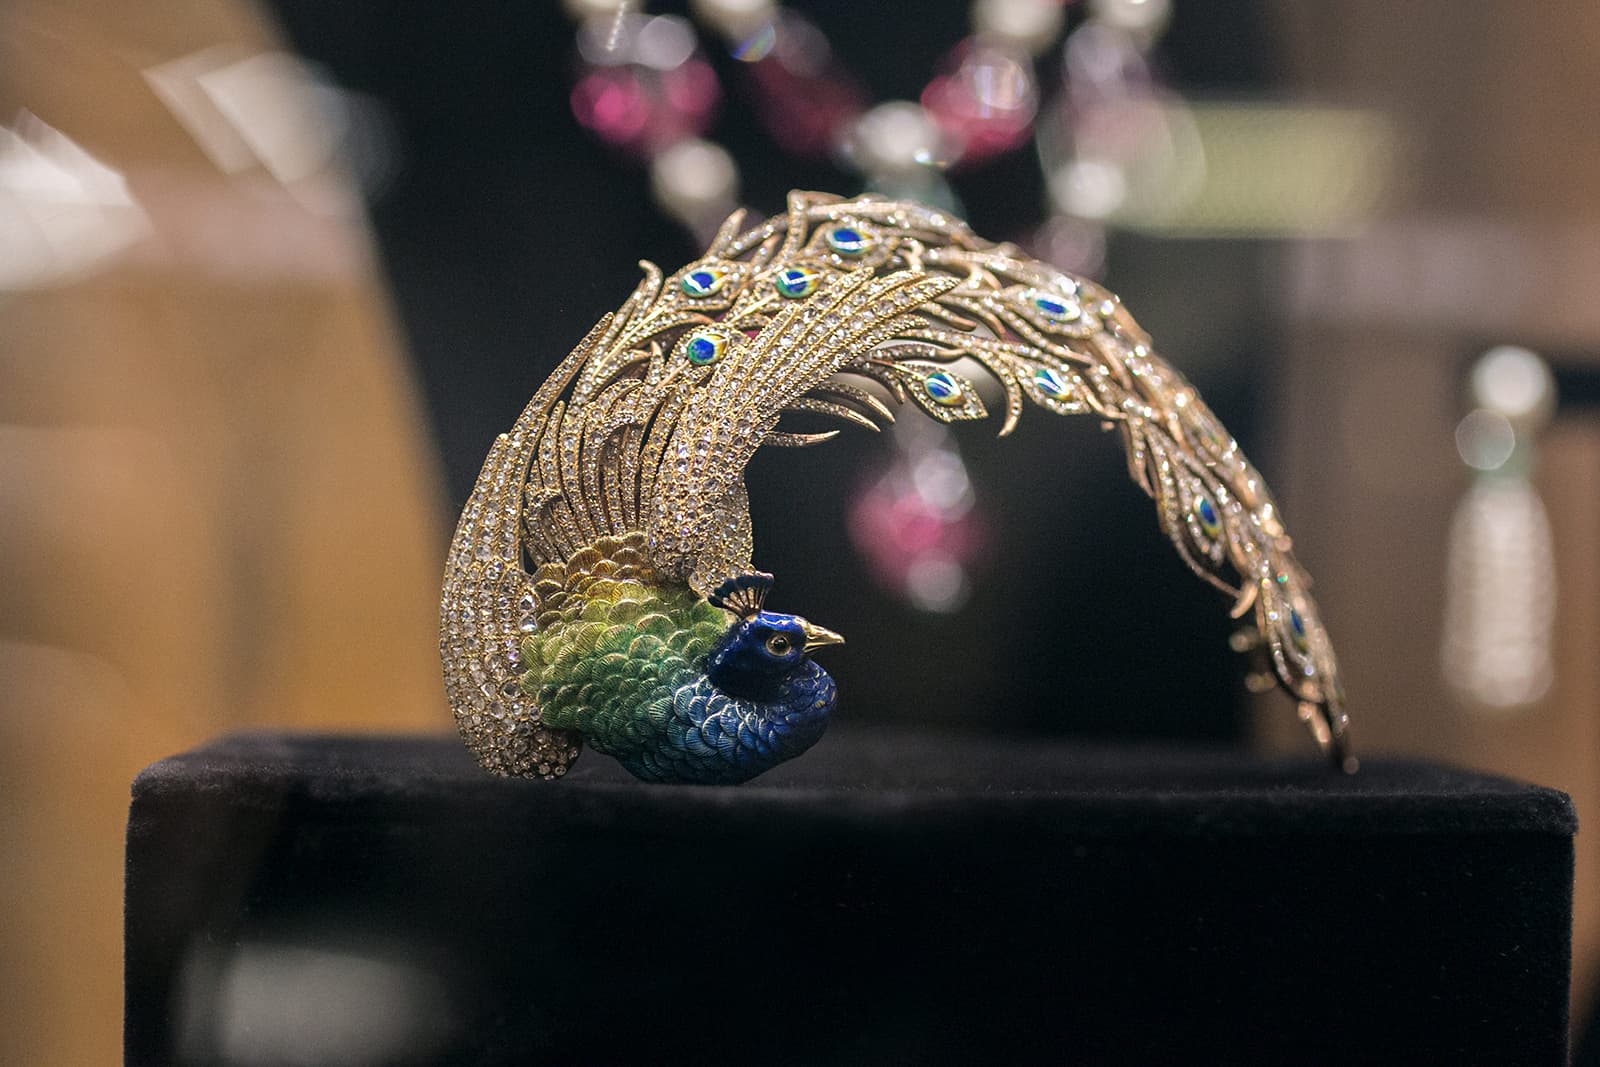 Christie’s ‘Maharajas & Mughal Magnificence’ Mellerio dits Meller peacock aigrette with diamonds in enamel and gold, commissioned by the Maharaja of Kapurthala in 1905 